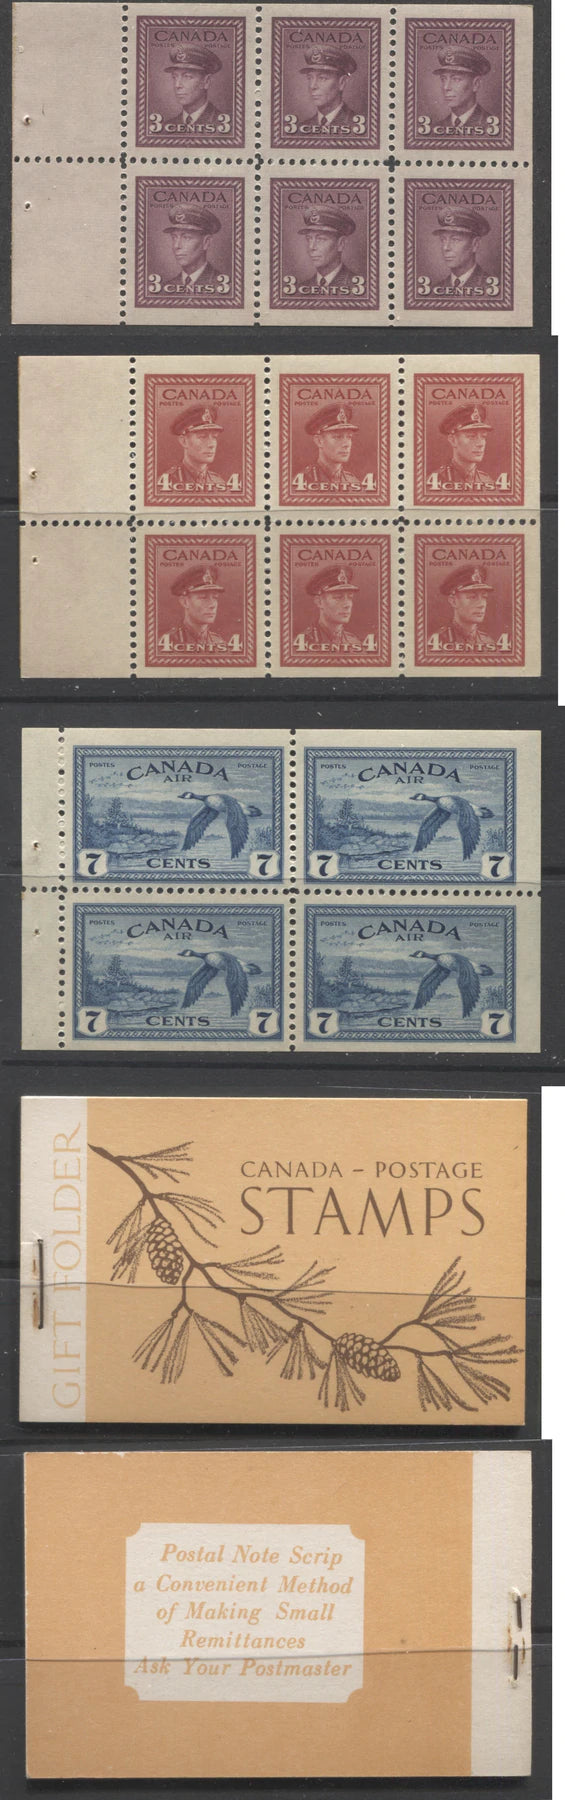 Lot 298 Canada #BK39a (McCann #39c) 1942-1949 War Issue Complete $1.00 English, Booklet Containing 1 Pane Each of 6 of 3c and 4c Plus 2 Panes of 4 7c  Airmail Stamps, 12 mm Staple